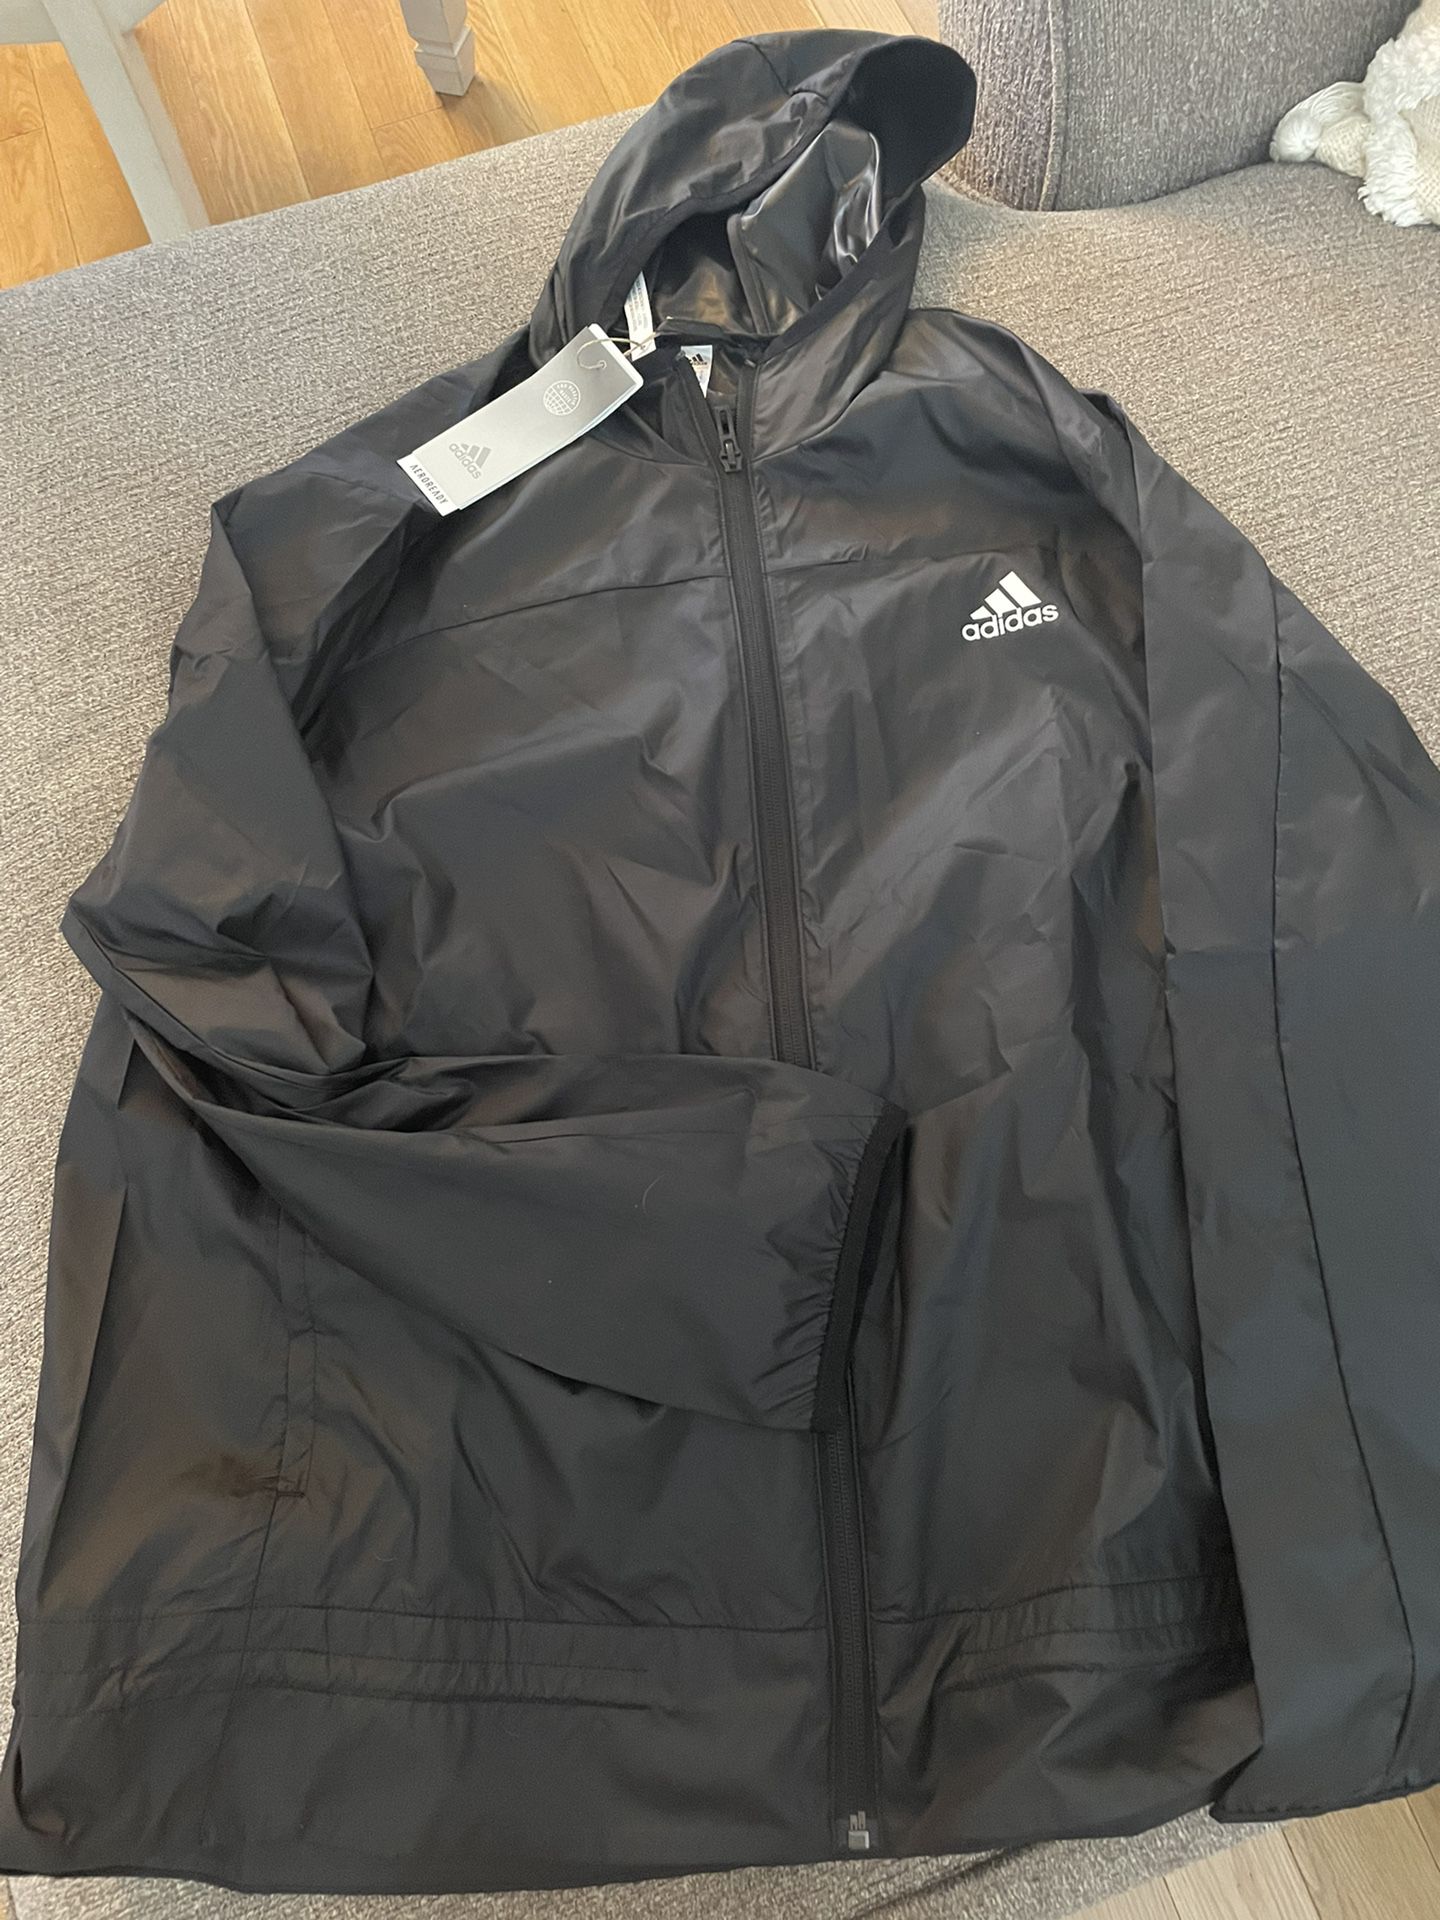 Womens Adidas Jacket - New With Tags